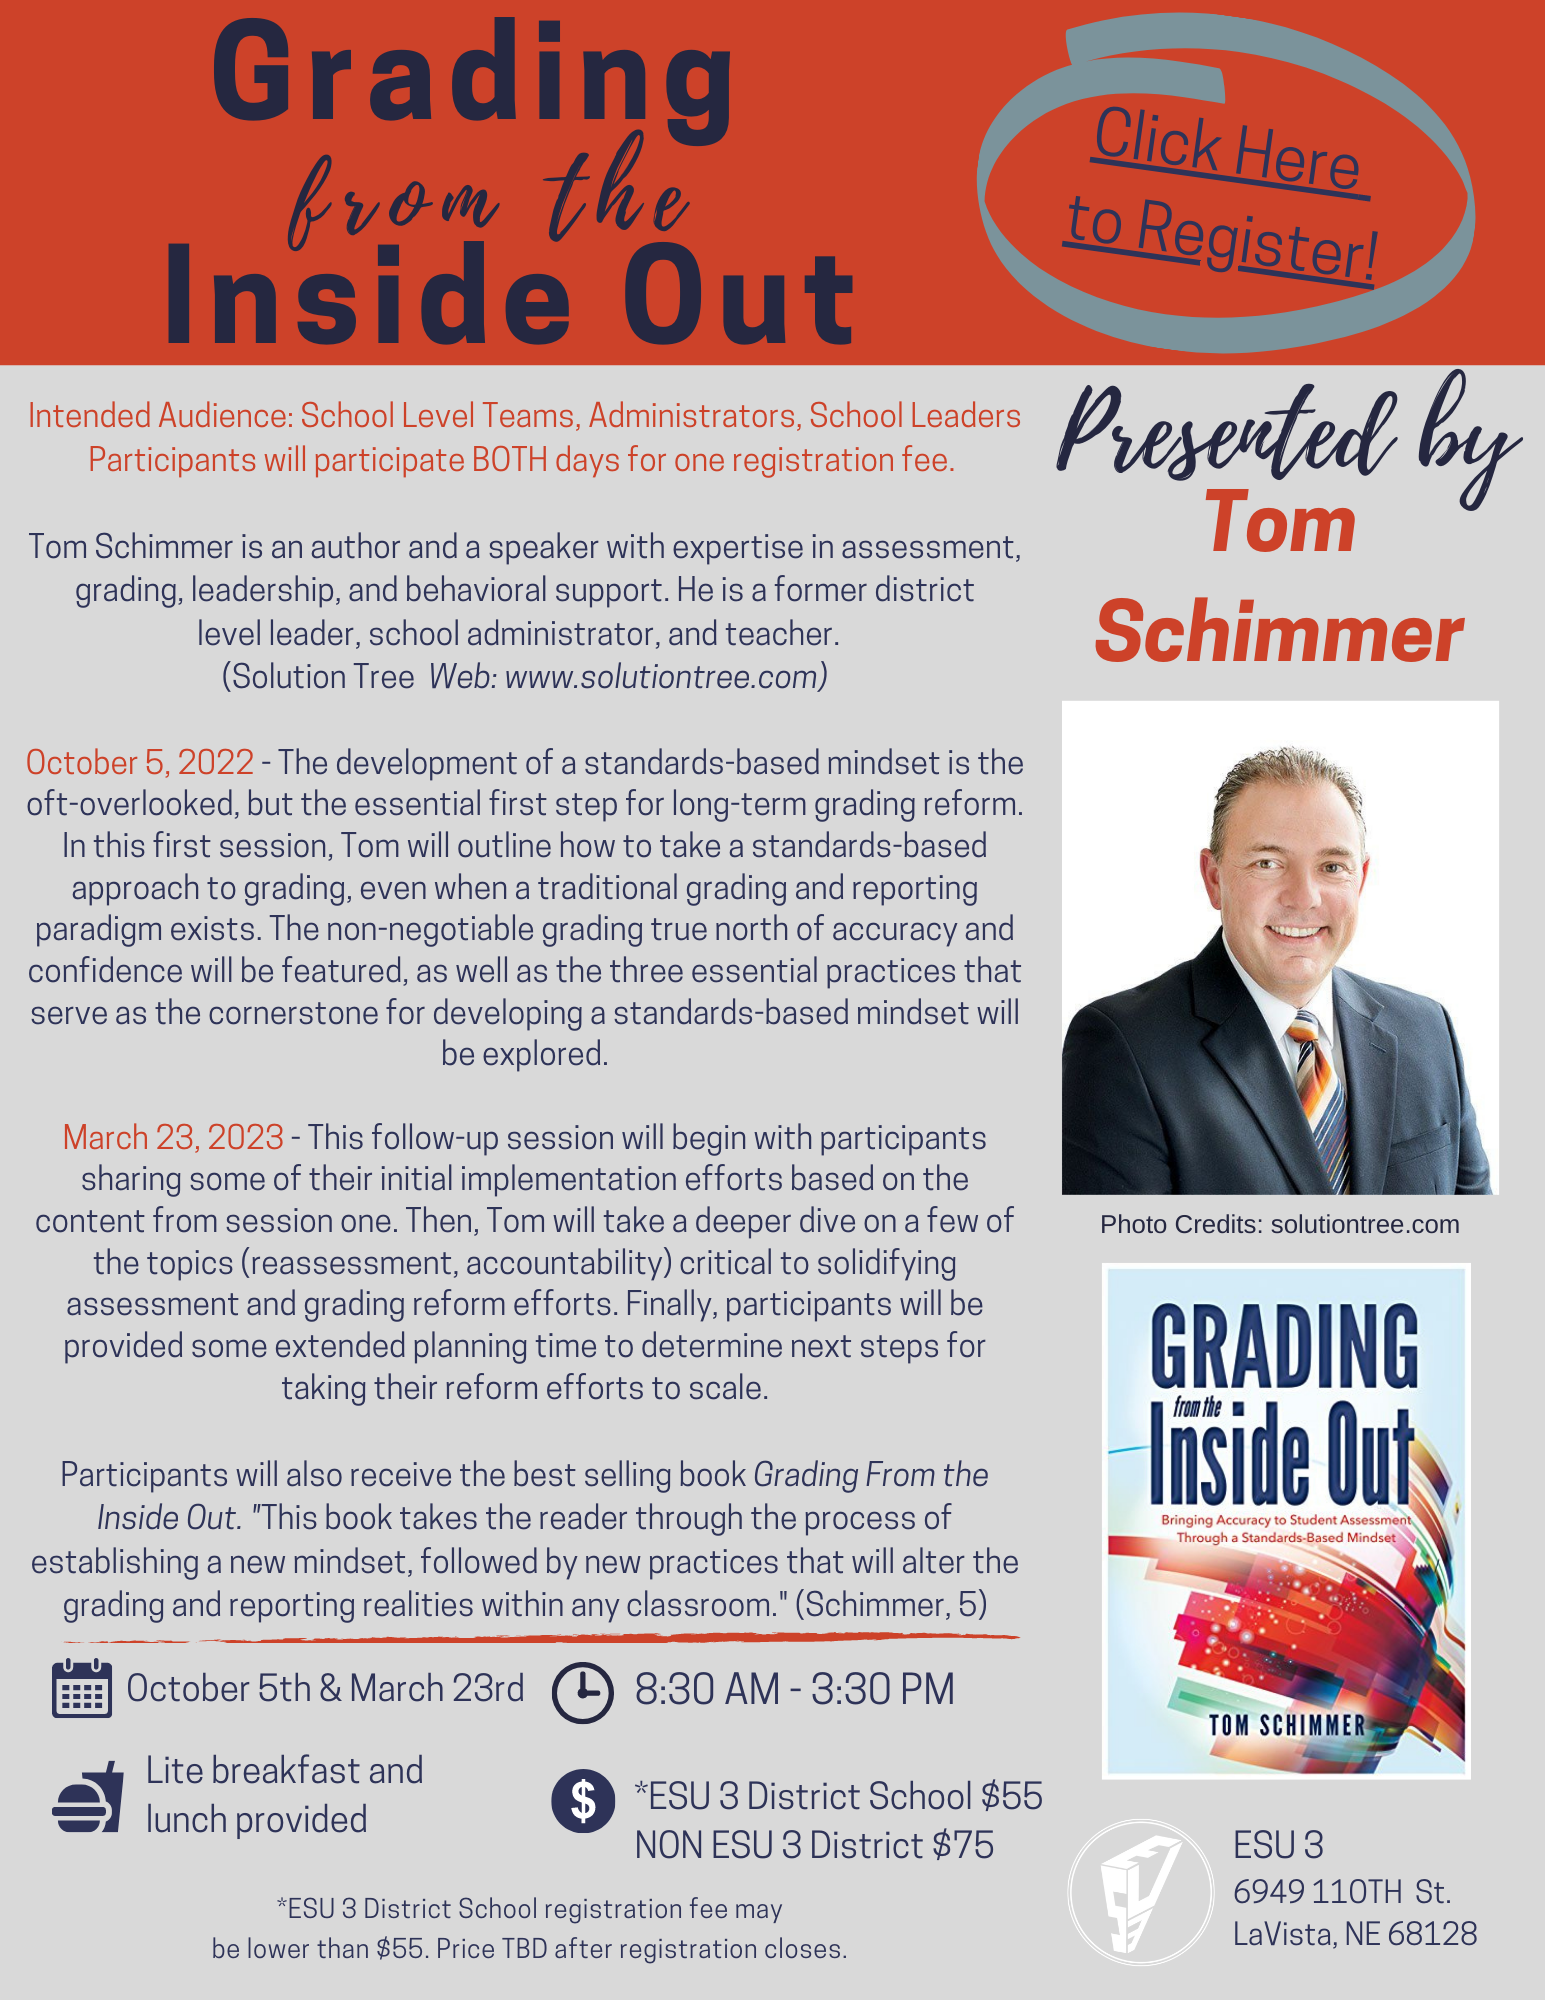 Click here to register for Grading from the Inside Out.